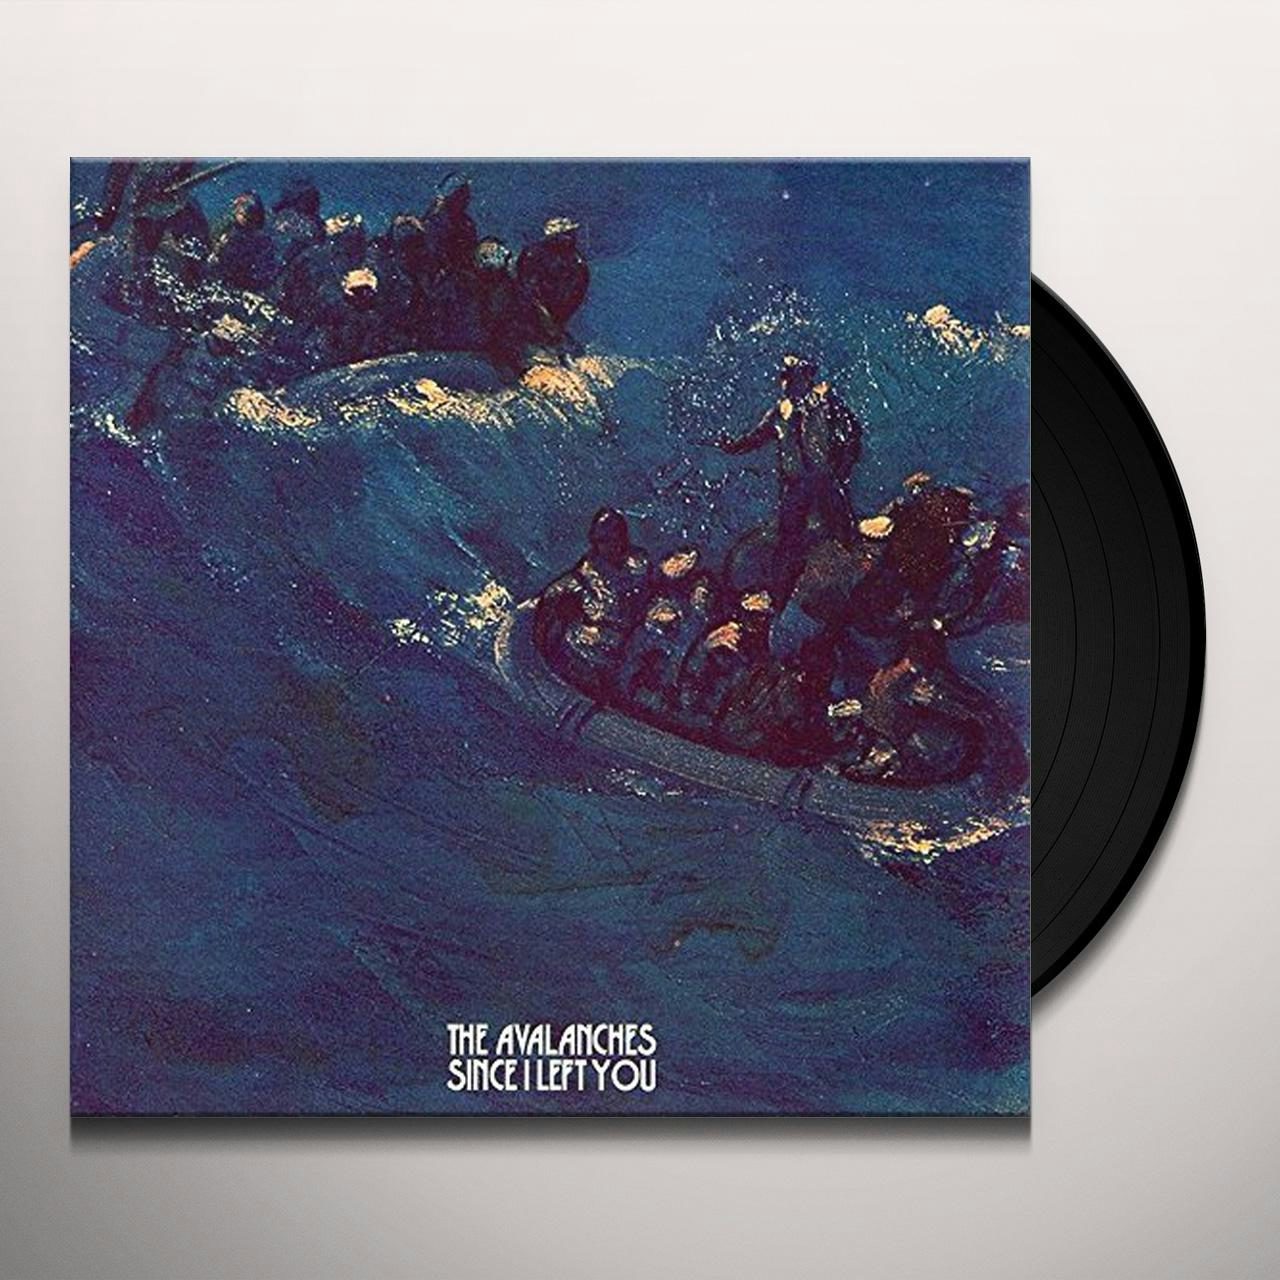 The Avalanches Since I Left You Vinyl Record $36.49$32.99